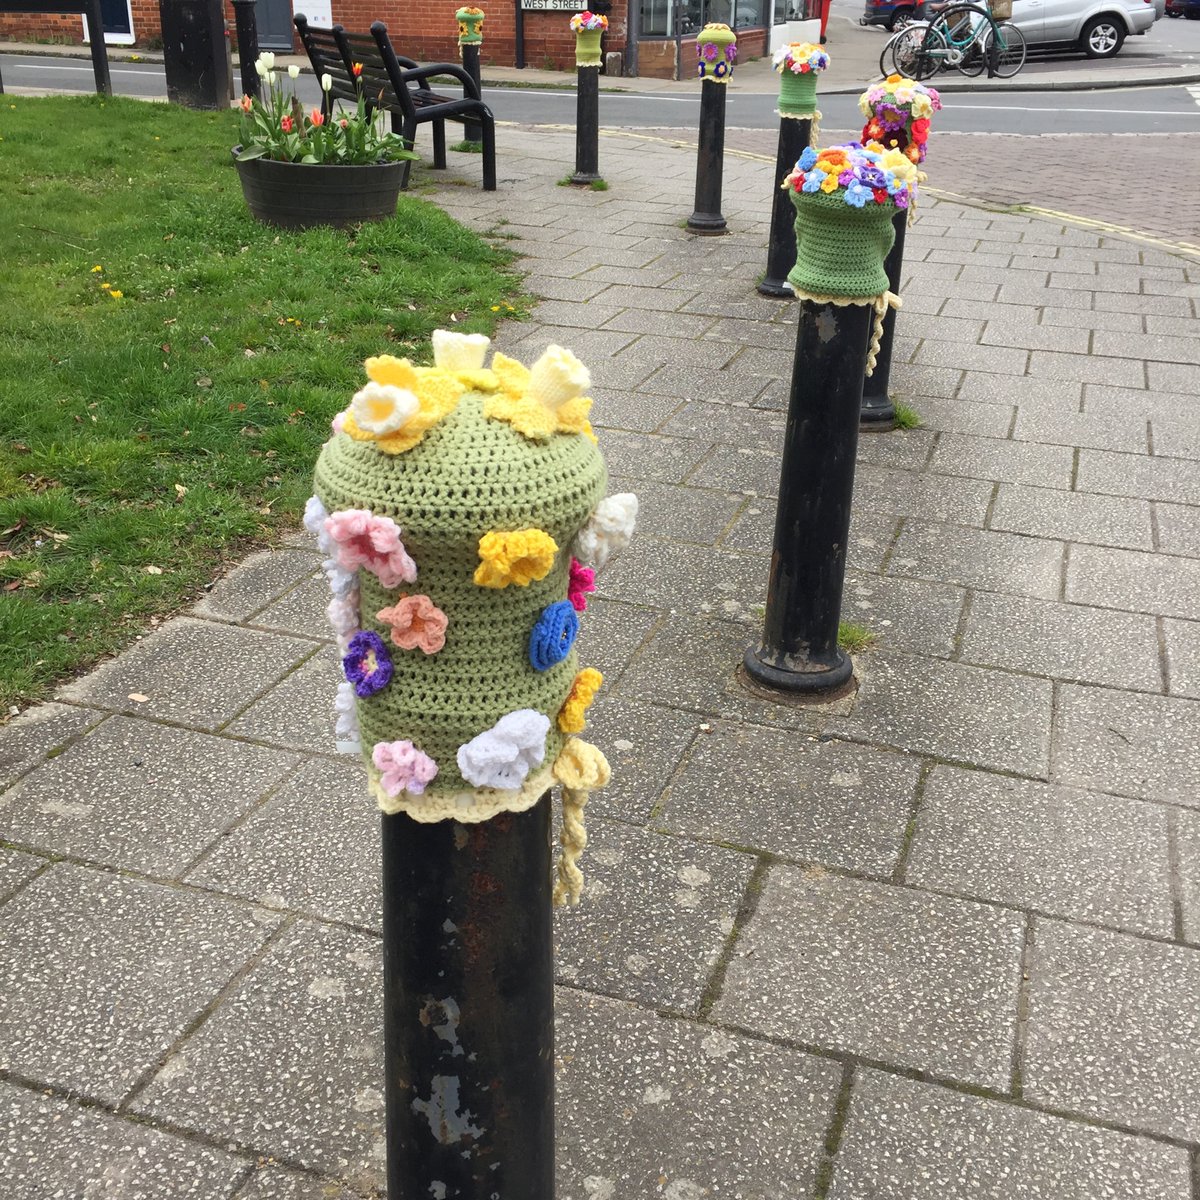 Yarnbombing  is alive and thriving on these bollards in Titchfield!